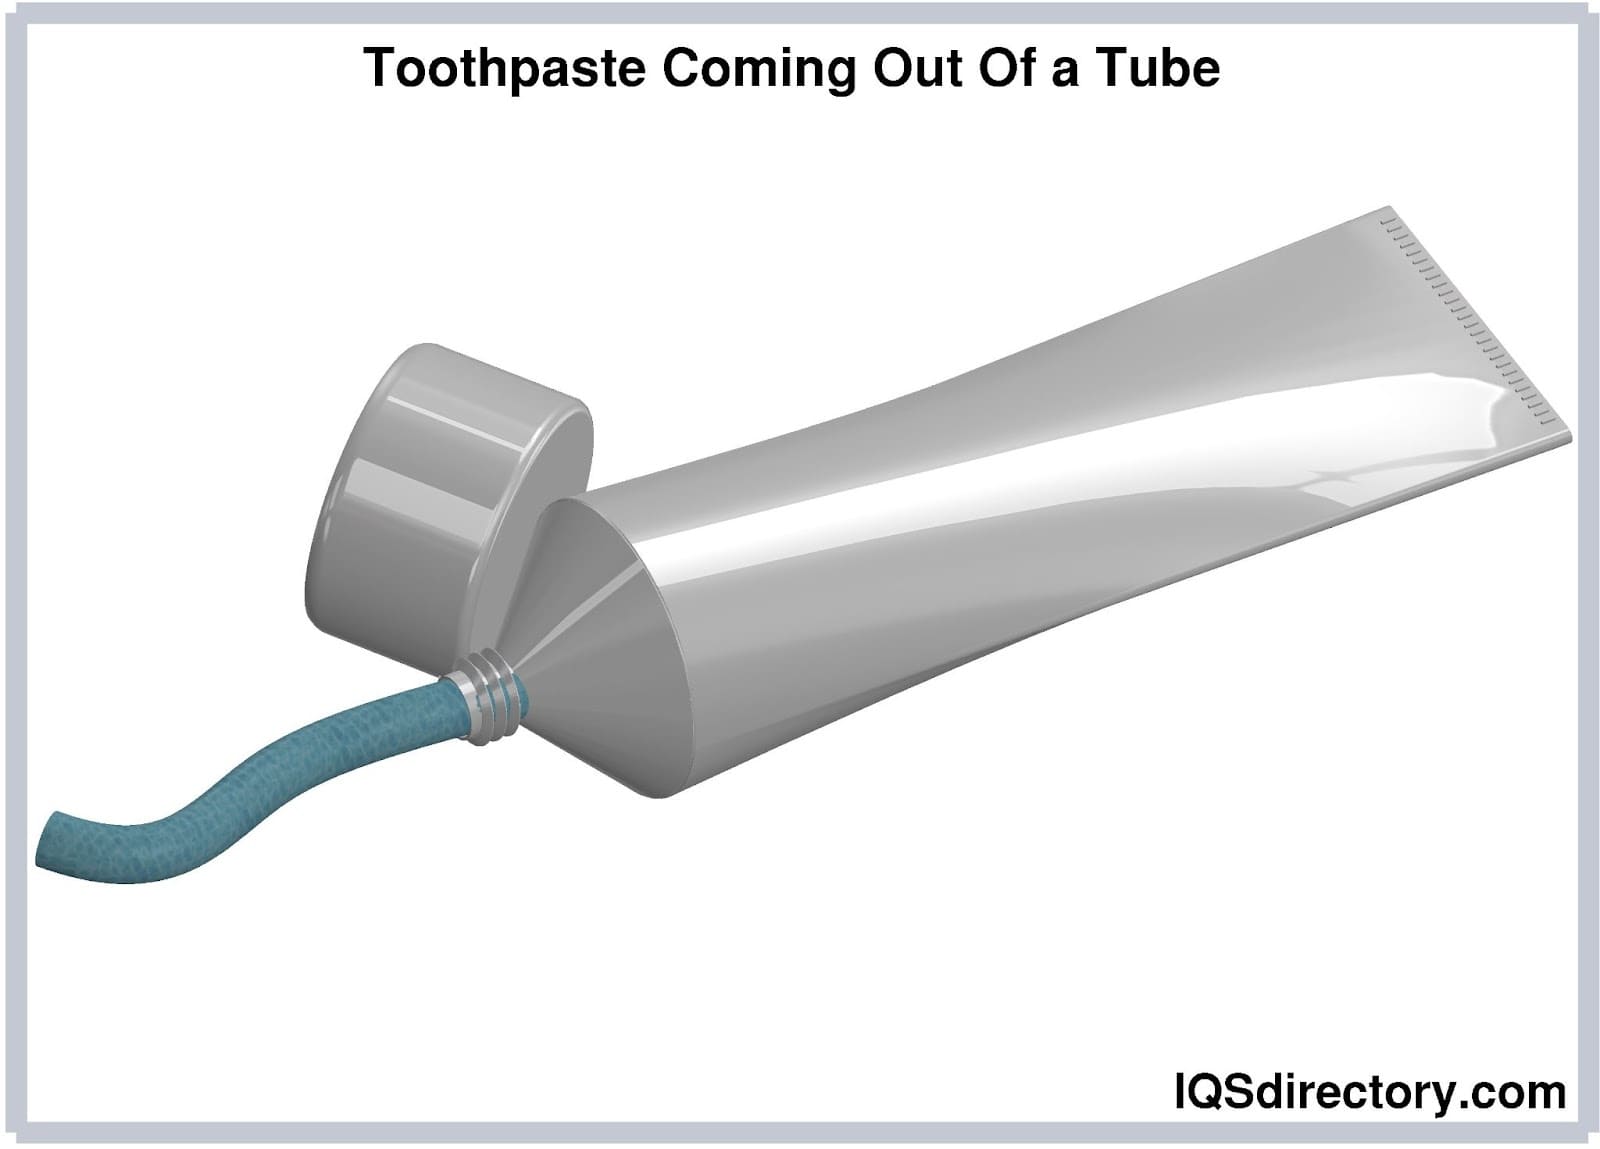 Toothpaste Coming Out Of a Tube